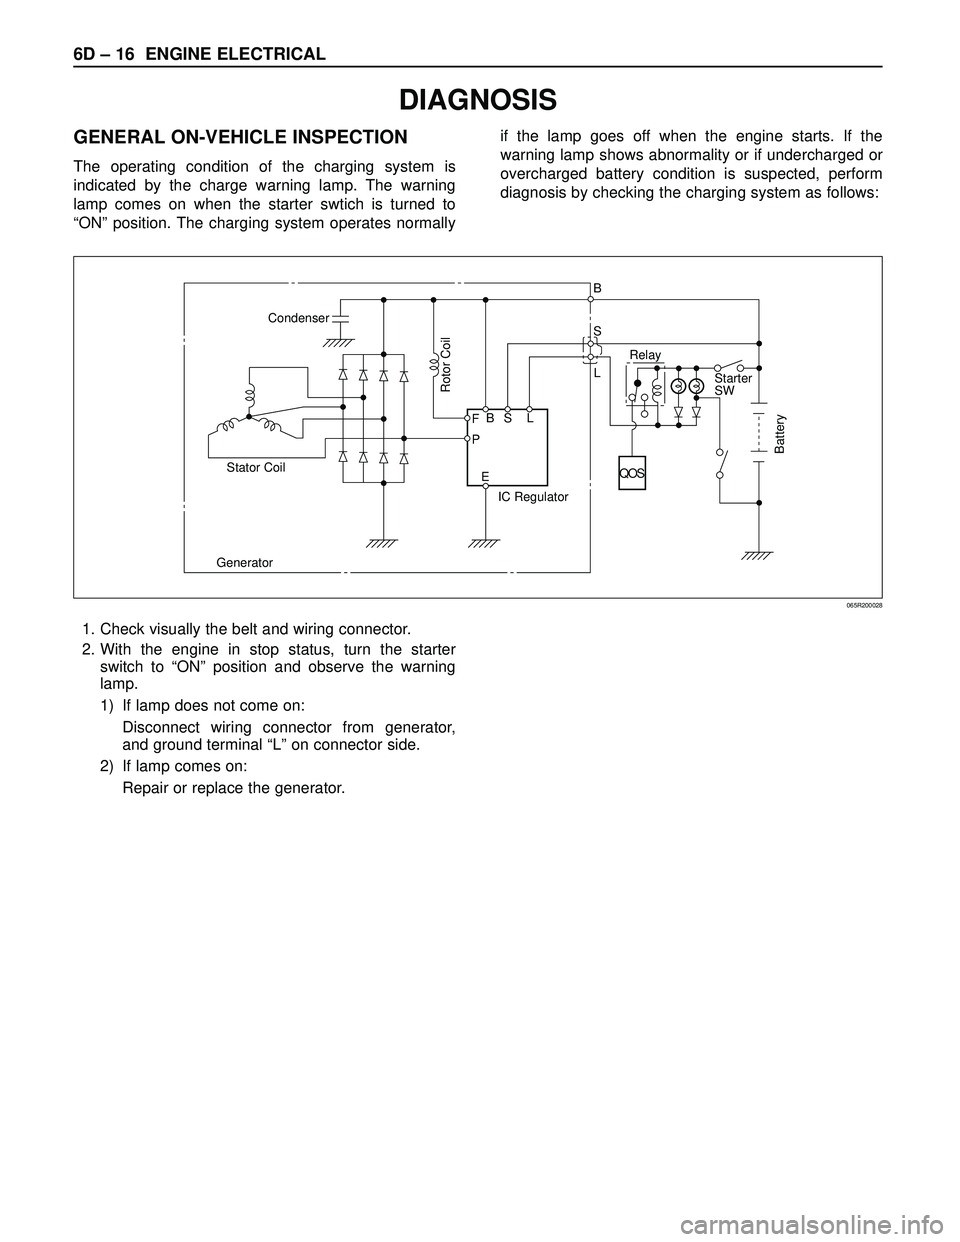 ISUZU TROOPER 1998  Service Manual PDF 6D – 16 ENGINE ELECTRICAL
DIAGNOSIS
GENERAL ON-VEHICLE INSPECTION
The operating condition of the charging system is
indicated by the charge warning lamp. The warning
lamp comes on when the starter s